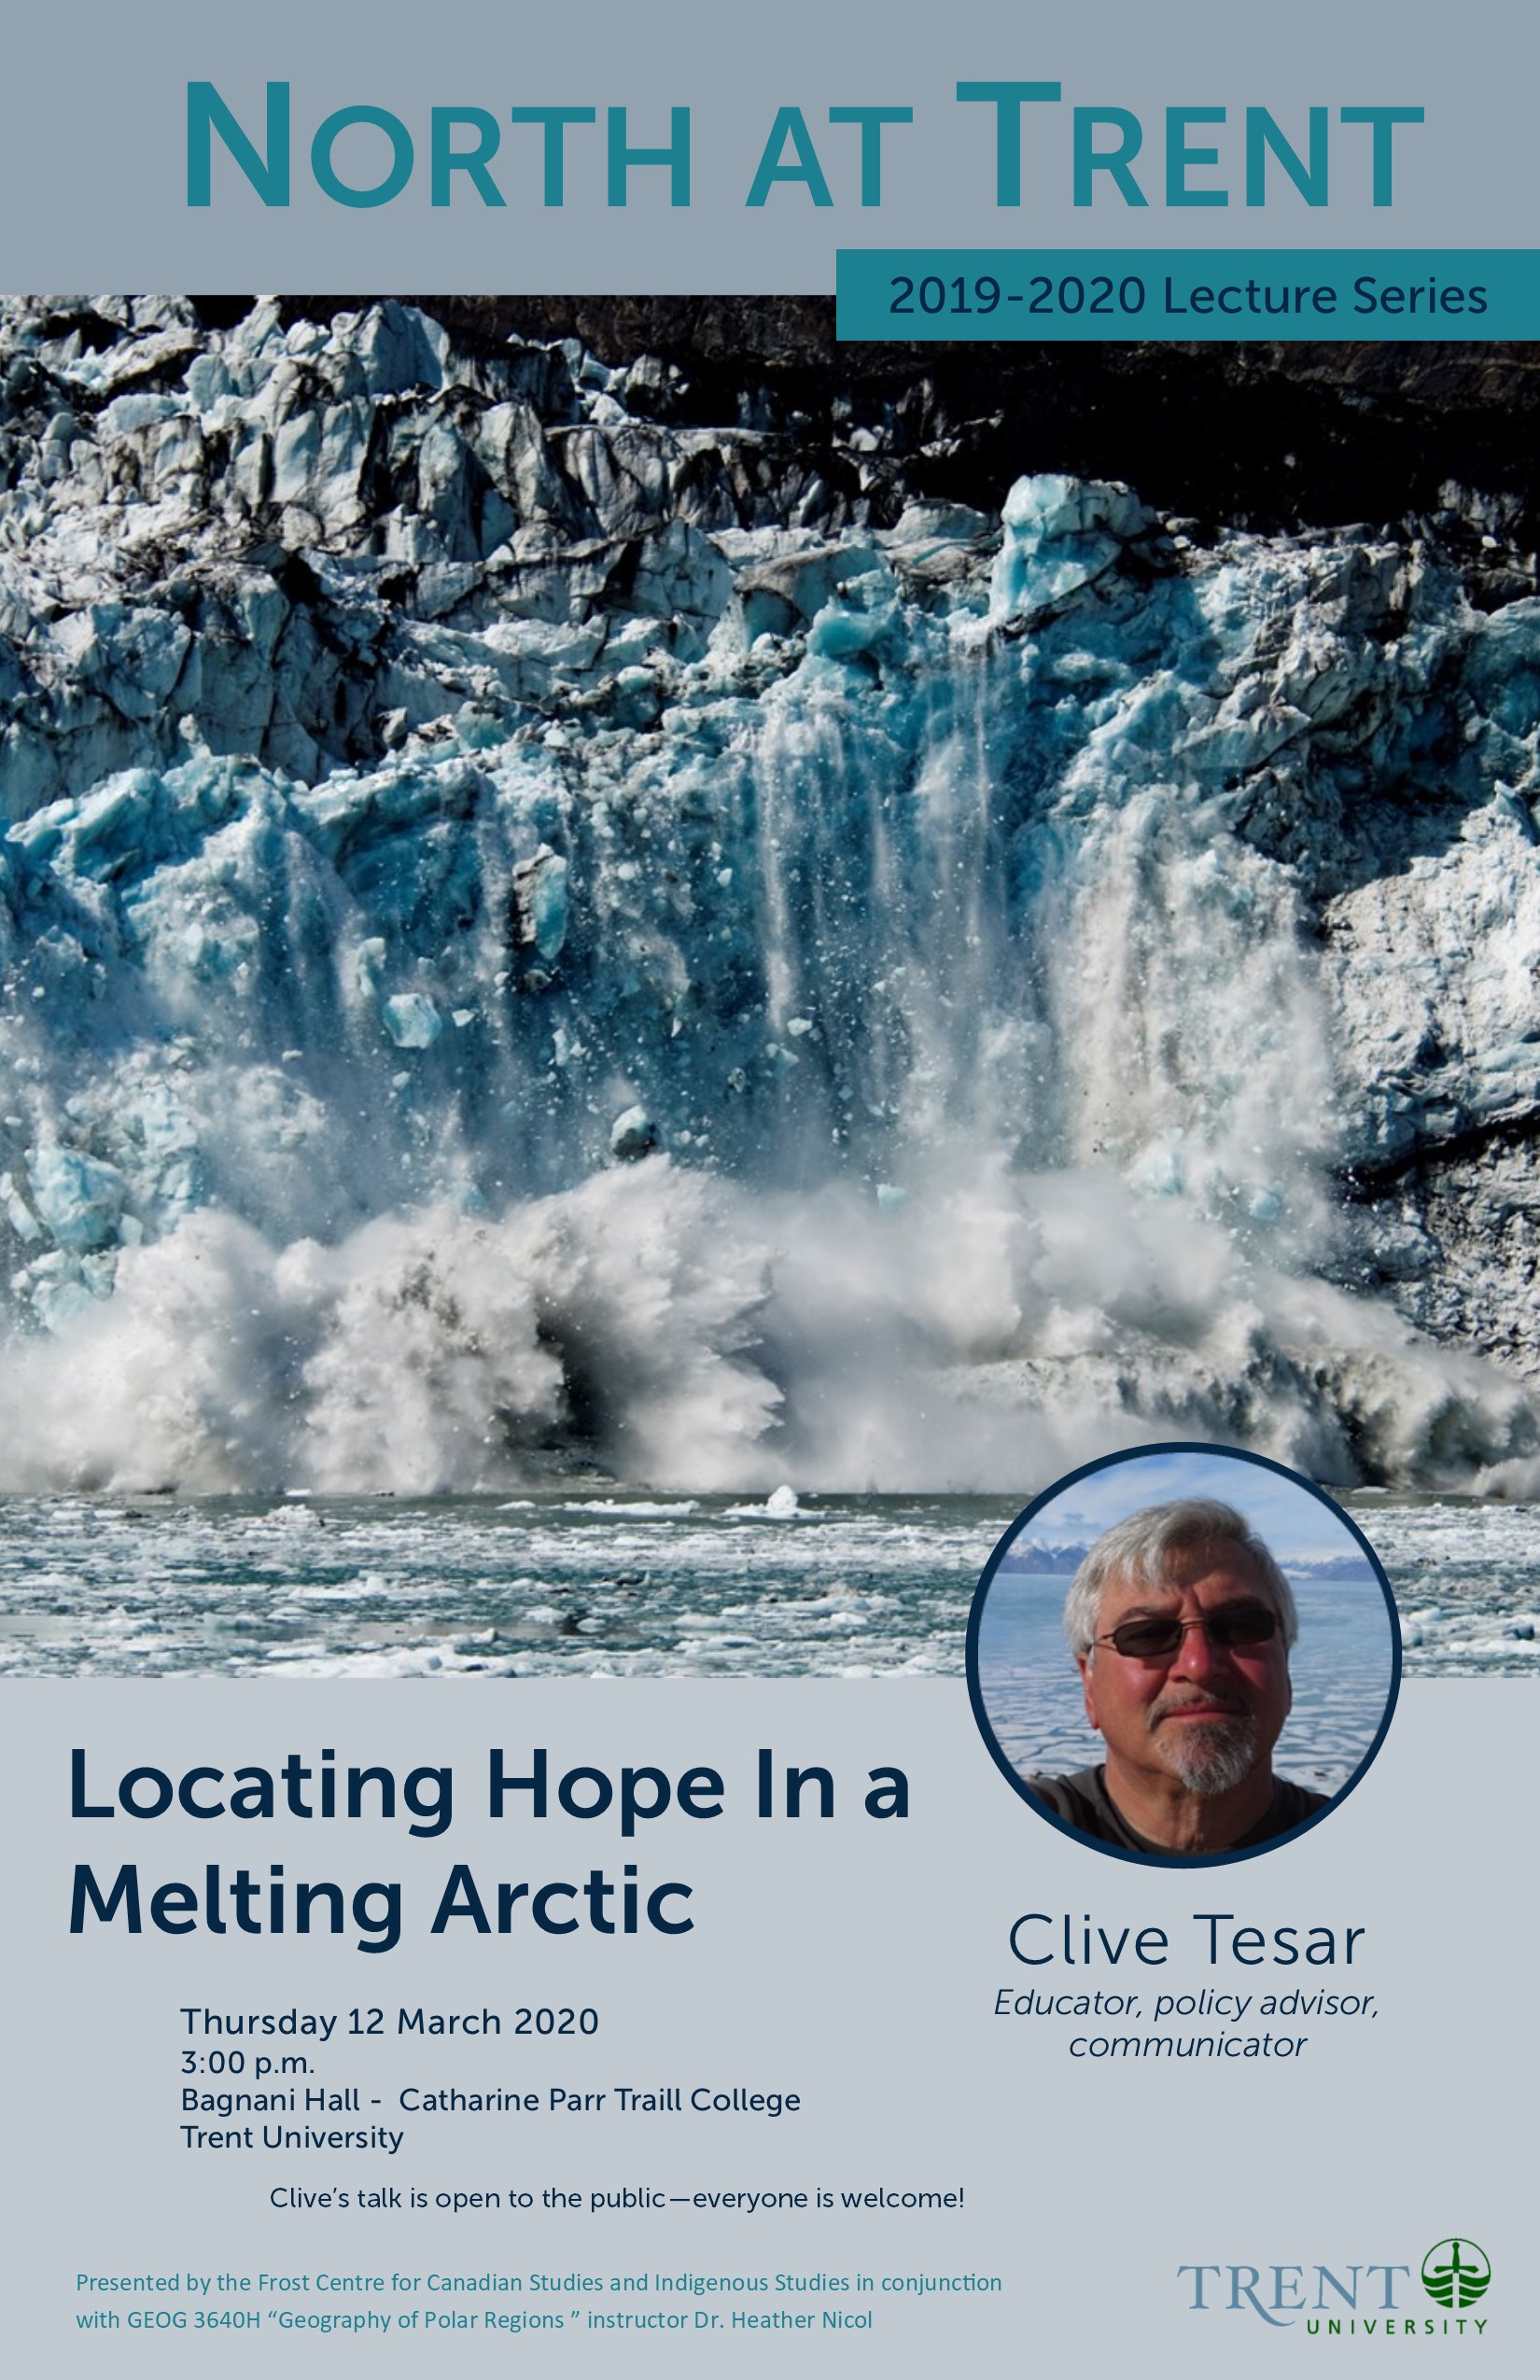 "Locating Hope in a Melting Arctic" 12 March 2020 with Clive Tesar